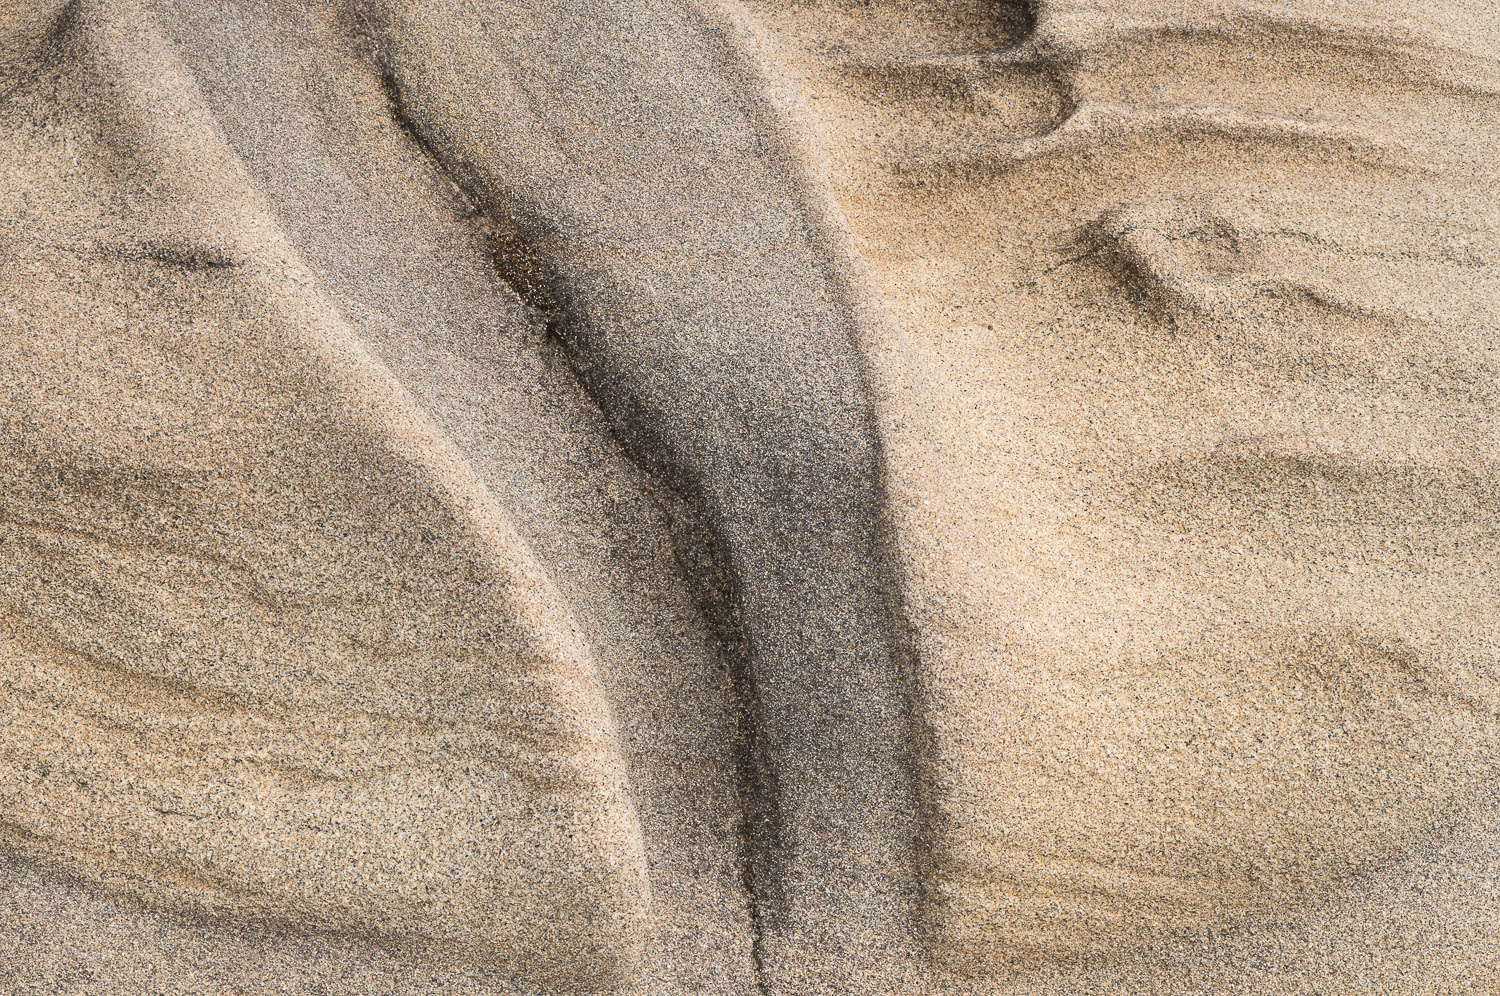 Close up of patterns in sandstone at Shore Acres State Park on the Oregon coast. Image #4412